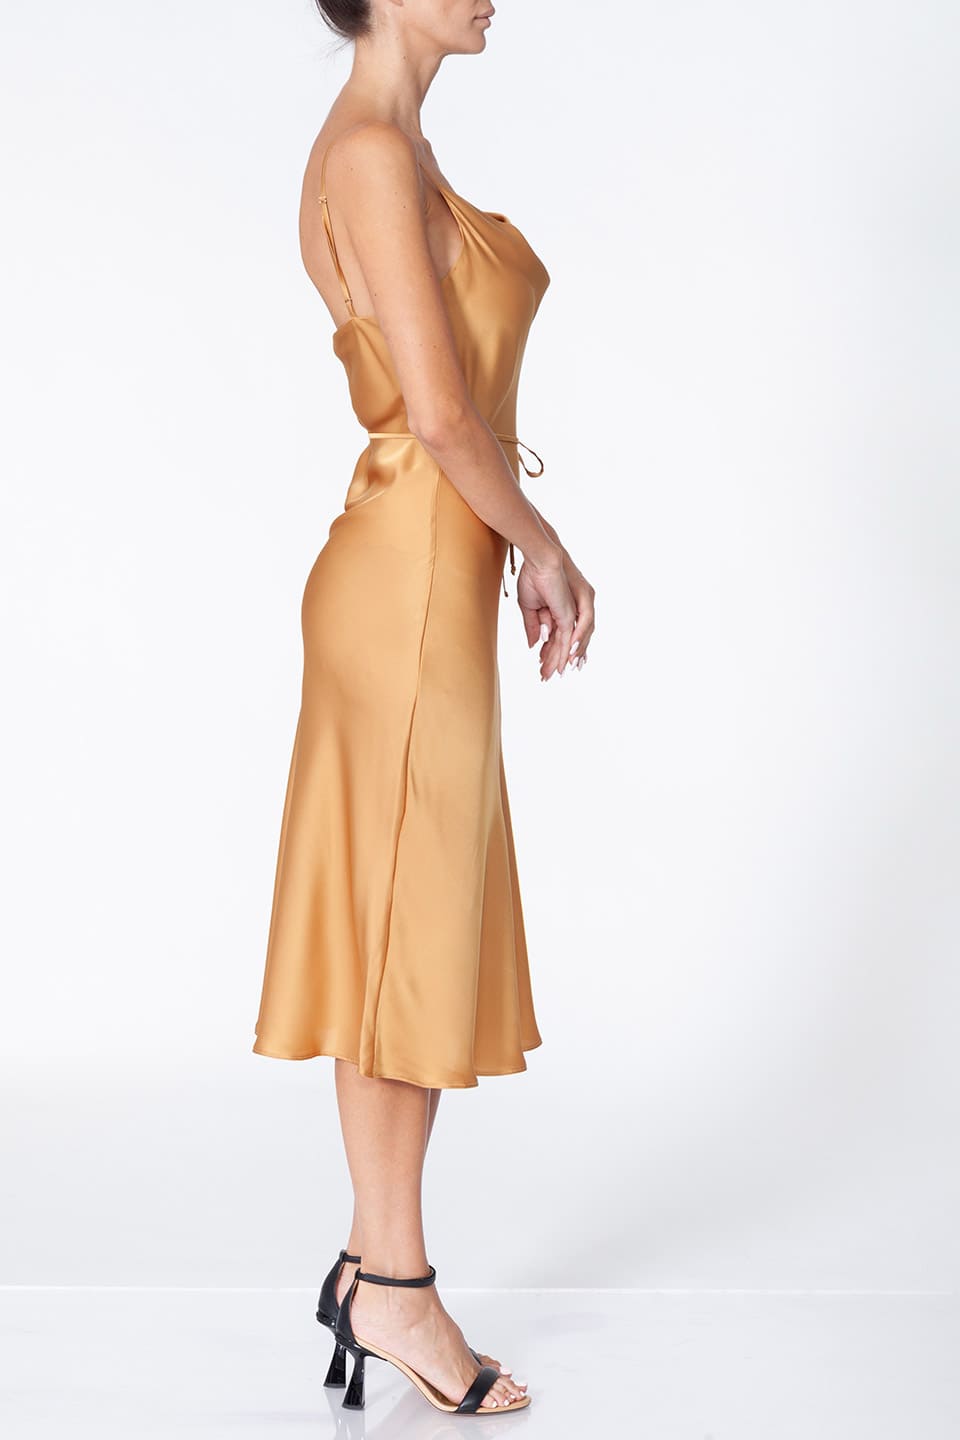 Thumbnail for Product gallery 2, Fashion Stylist Anze's gold midi dress full-body left side view